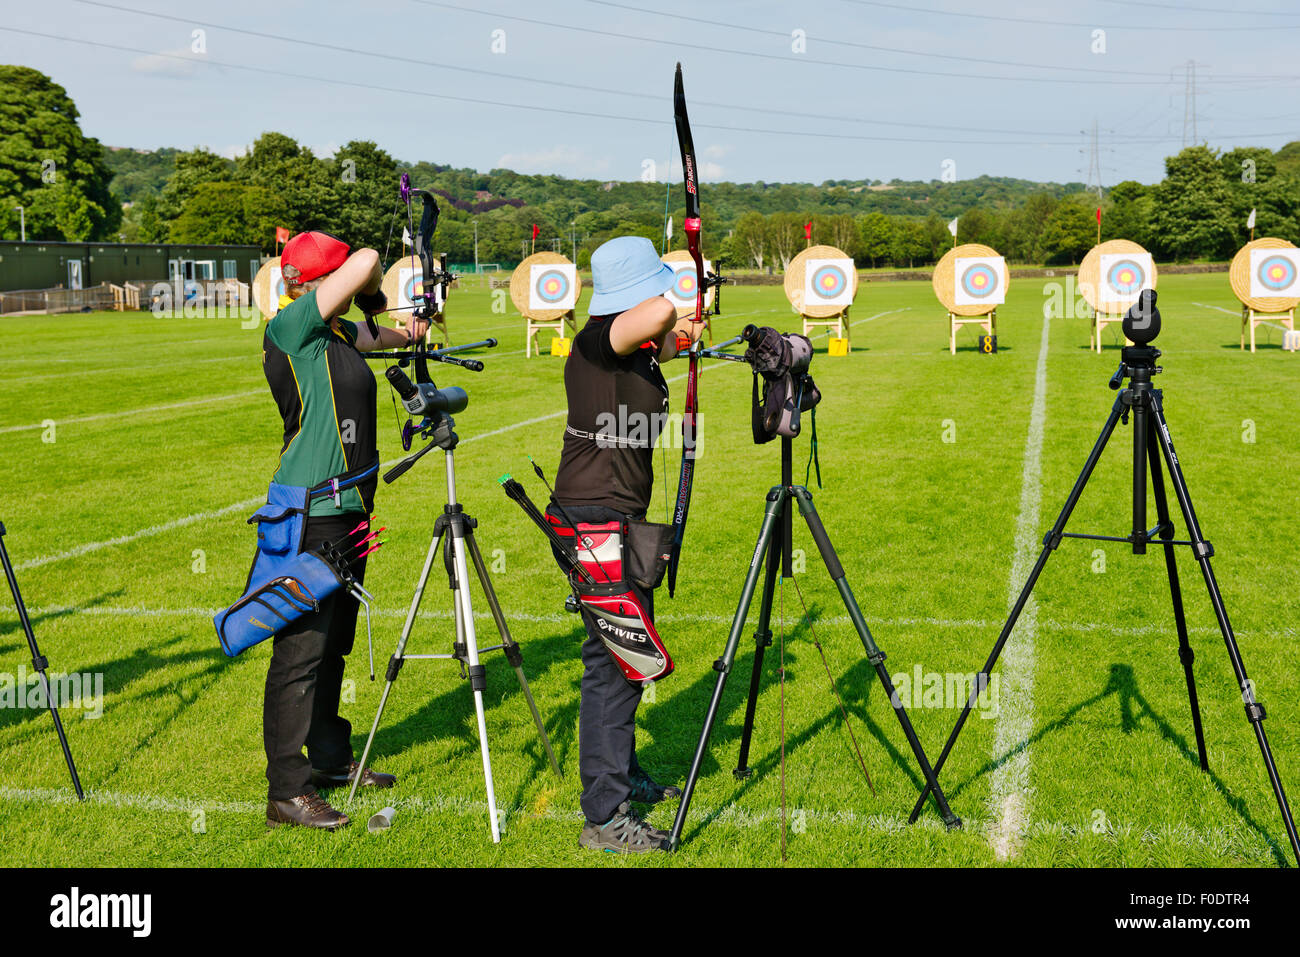 Two women archers in line shooting different styles of modern bows (compound and recurve) in competition, West Yorkshire, Englan Stock Photo